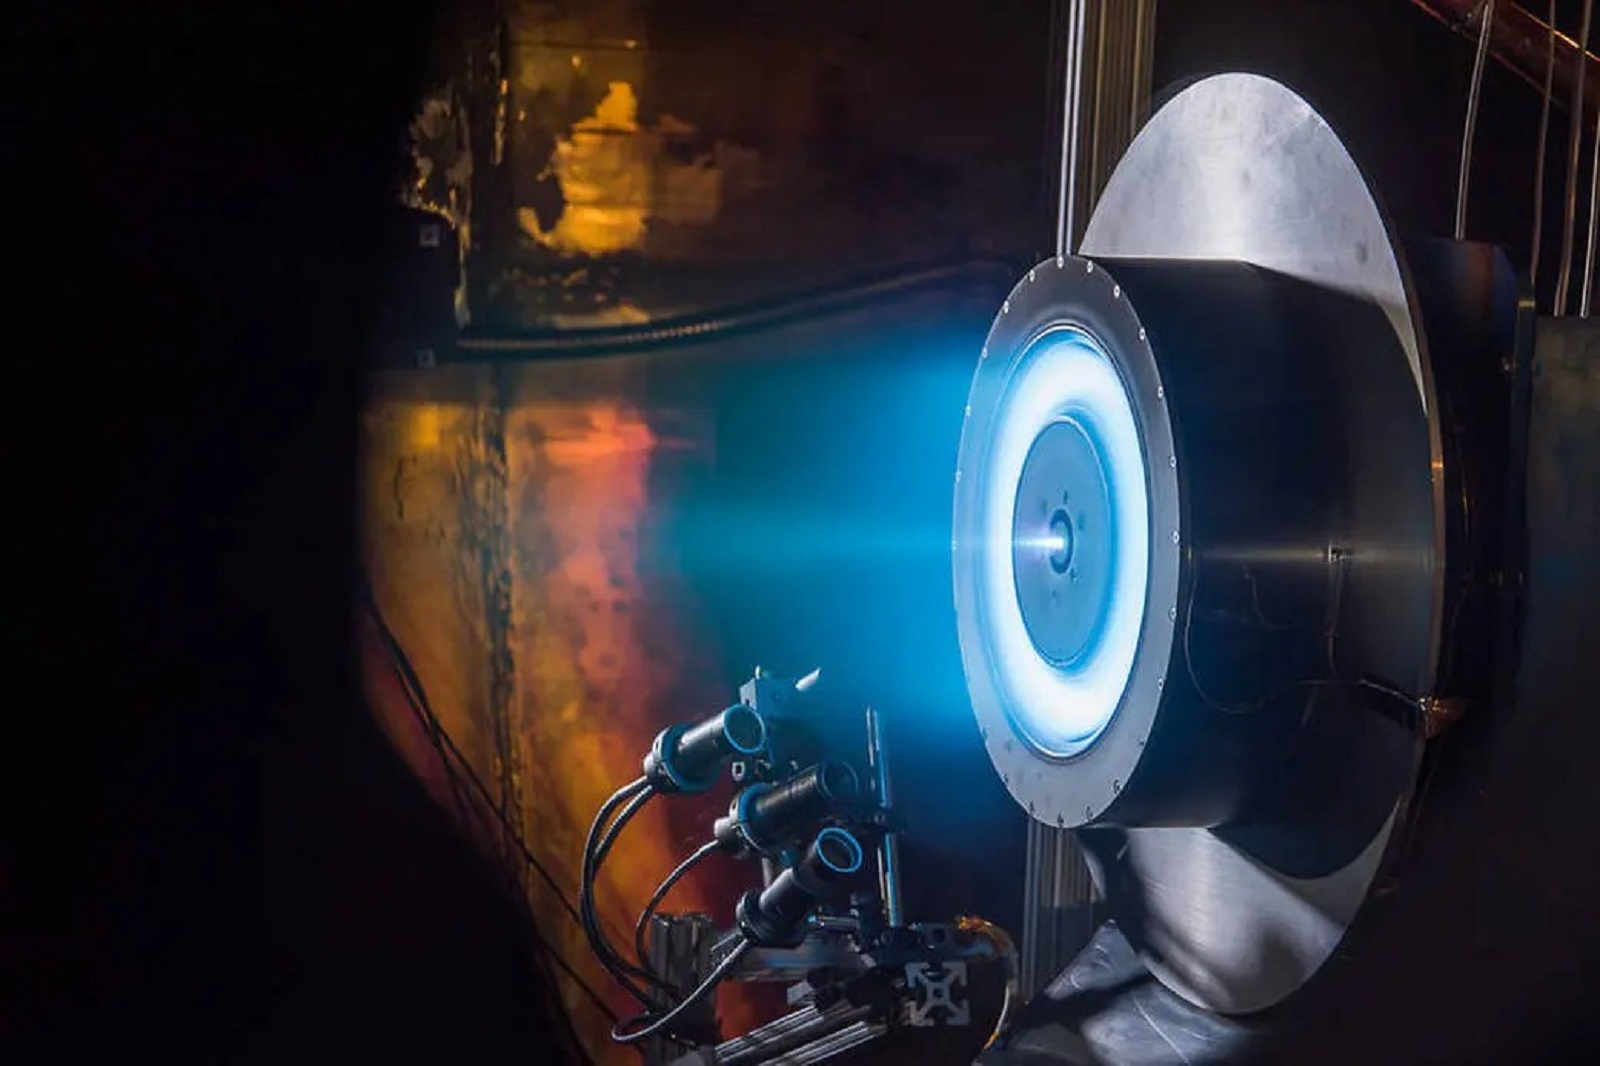 It’s the most powerful ion engine ever.  It has passed a critical test, and now it’s time to use it